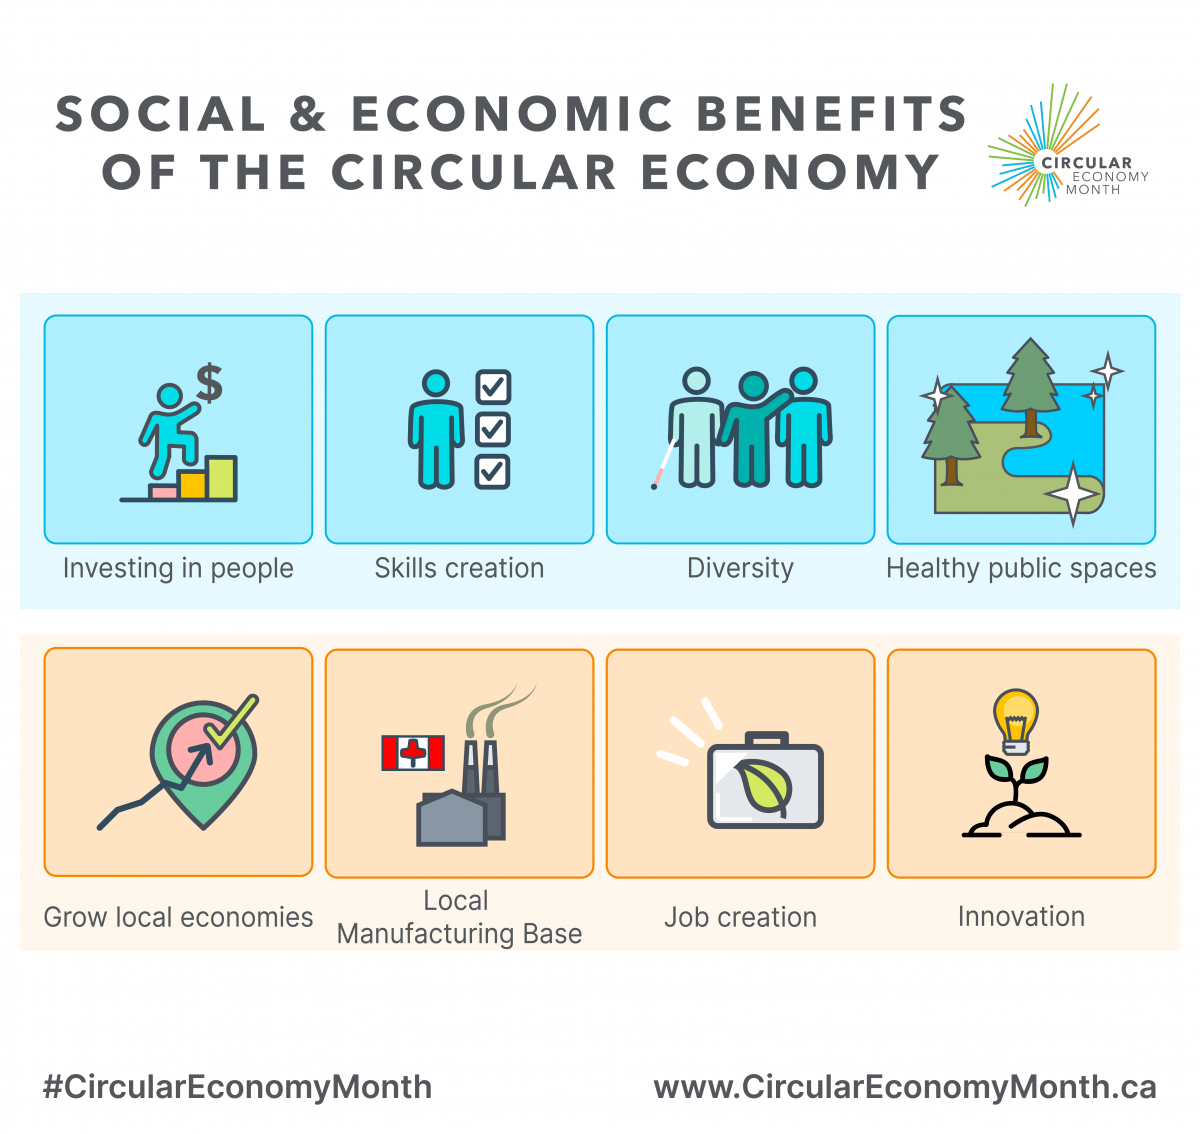 Top text "Social and economic benefits of the circular economy" with the circular Economy Month logo to the right of the text. Below text are four light blue squares with images in each square. First blue square image of a blue person climbing a bar graph with dollar symbol in hand with text "Investing in people". Second blue square of a blue person standing with 3 white blocks with check marks on the blocks stacked on top of each other with text "Skills creation". Third blue box image of three people of different colors, one blue, one green, one light blue with text "Diversity". Fourth blue square image of land in light green with two trees by water. Bottom four peach colored squares with images. First peach square image of a upside down tear shape in green with a pink circle in the middle and a squiggly line arrow pointing to the pink circle and a yellow check mark in the pink circle with text "Grow local economies". Second peach square image of the red and white Canada flag next to a grey factory with two smoke stacks with smoke coming out with text "Local Manufacturing Base". Third peach square image of a grey briefcase with green leaf on it with text "Job creation". Fourth peach square with image of yellow lightbulb on top of green sprout coming out of the ground with text "Innovation.